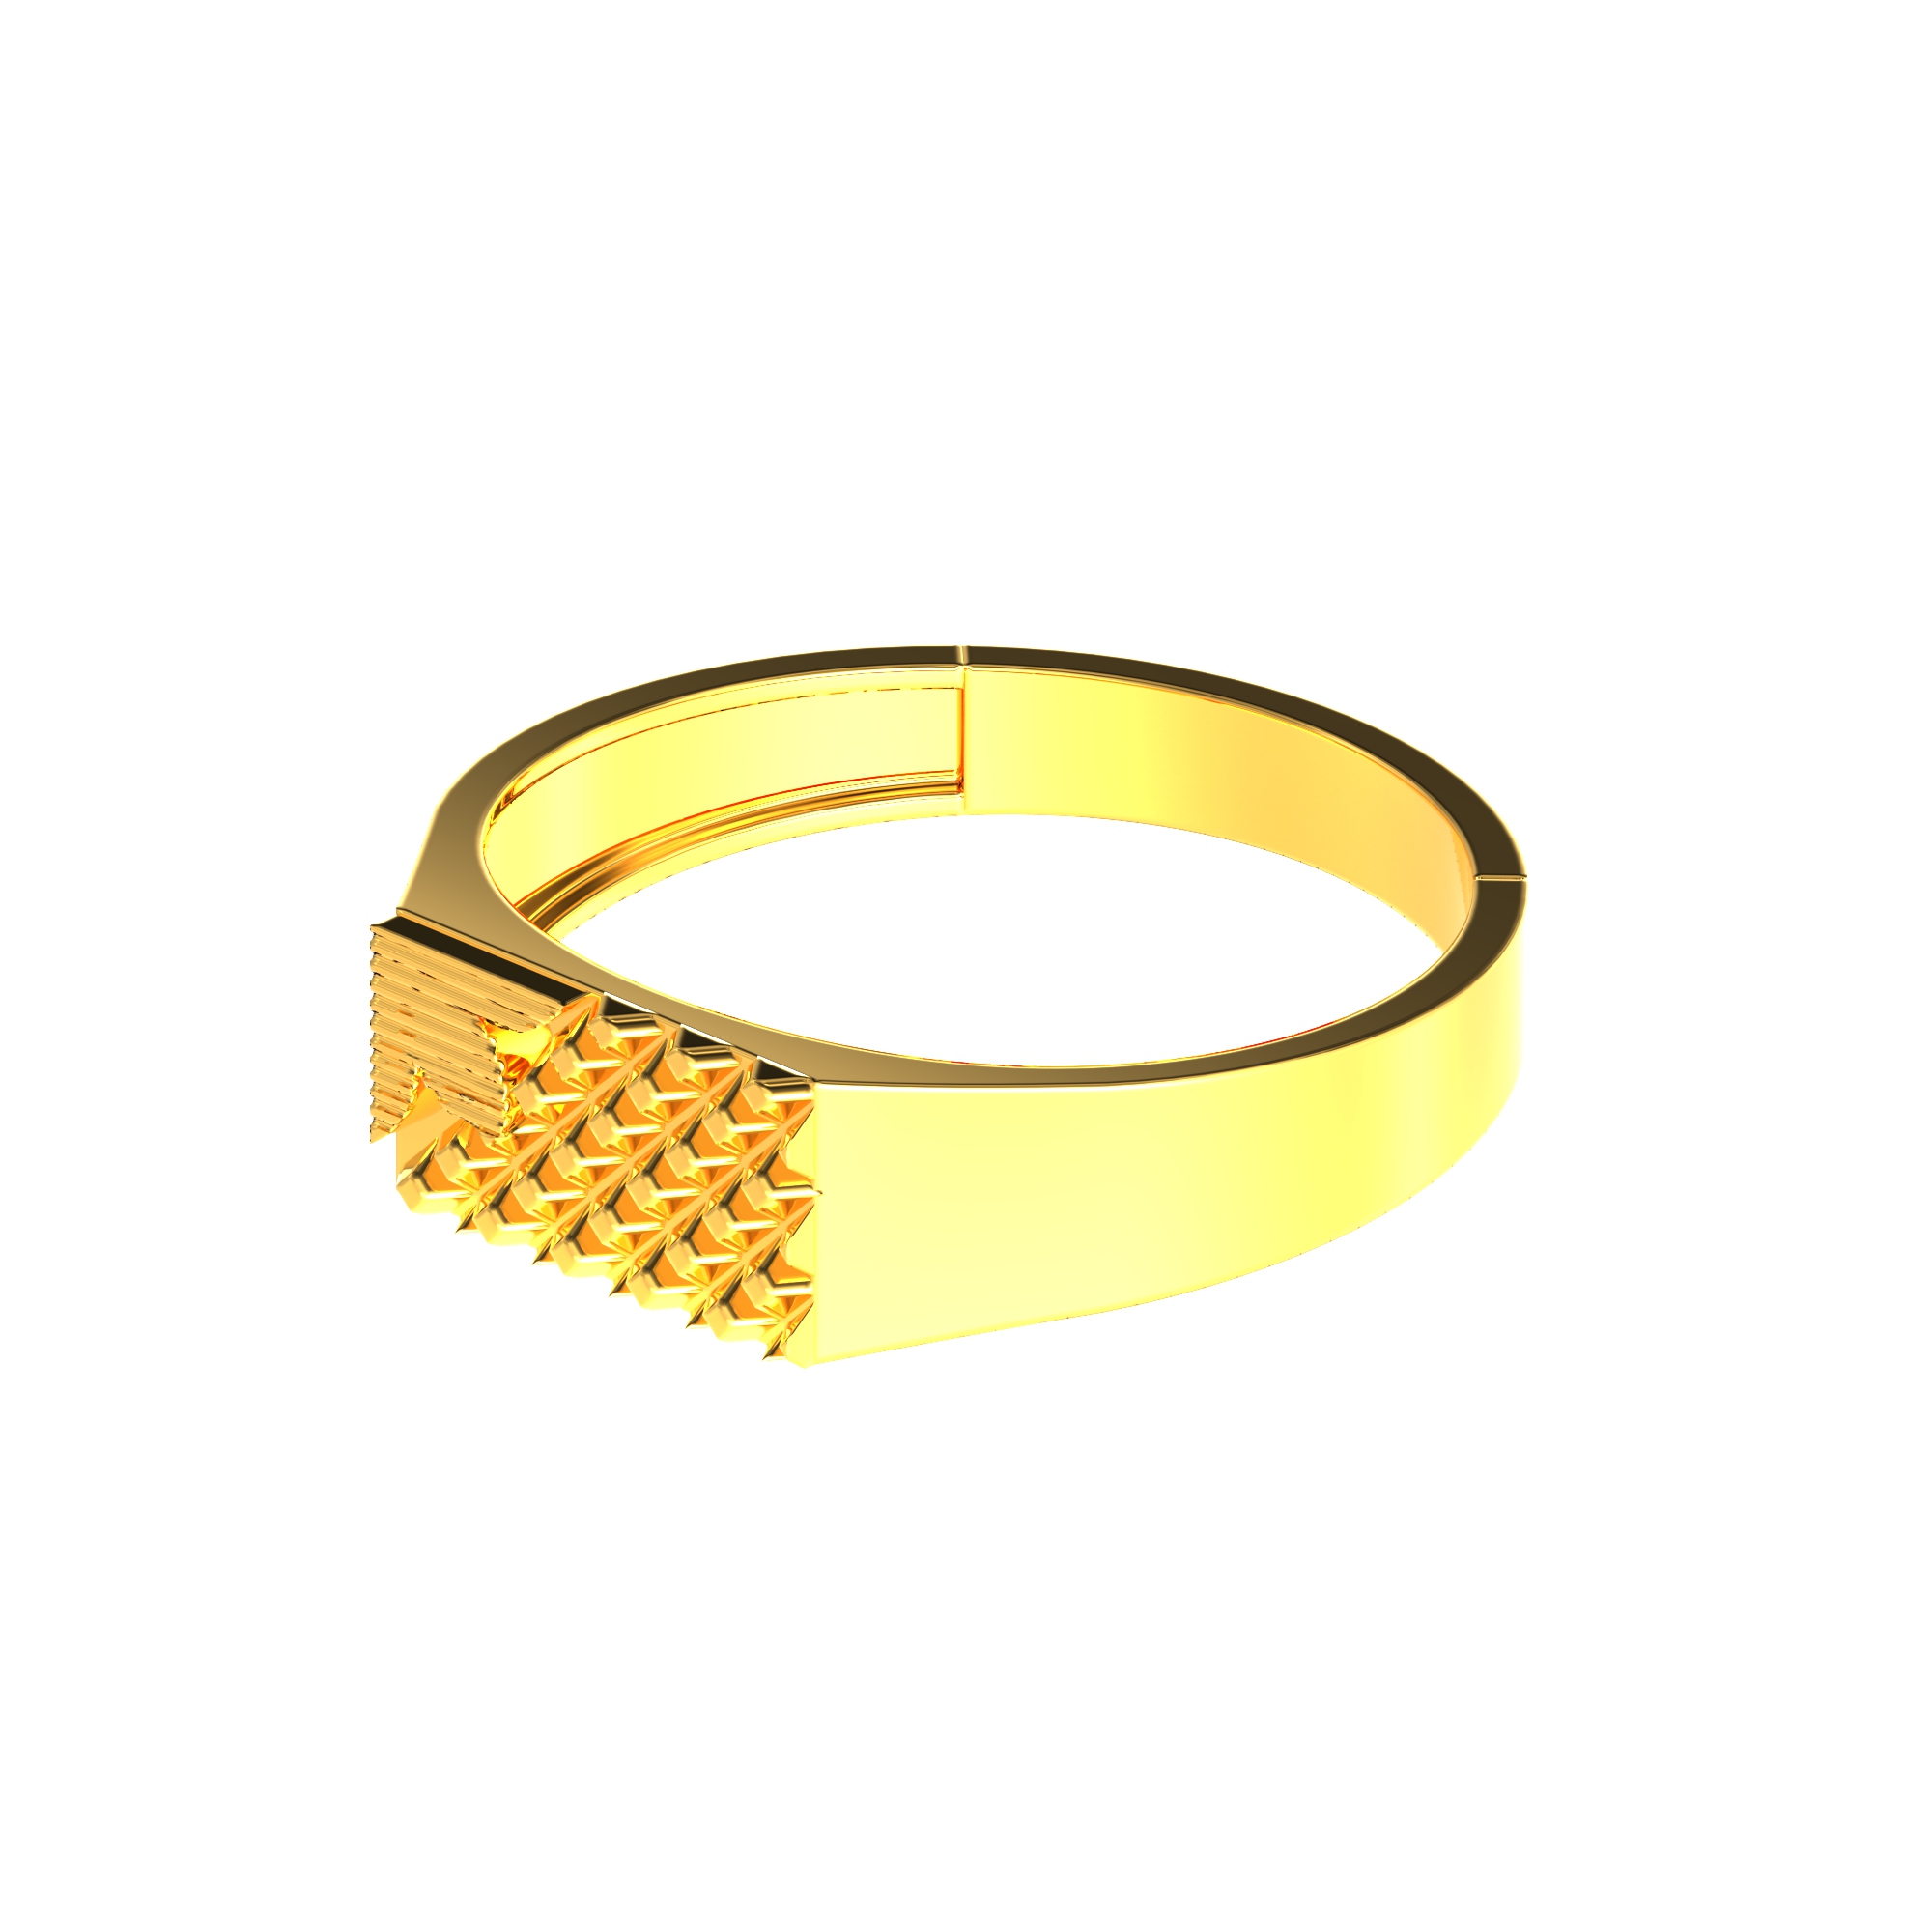 Square Shape Gold Ring for Gents